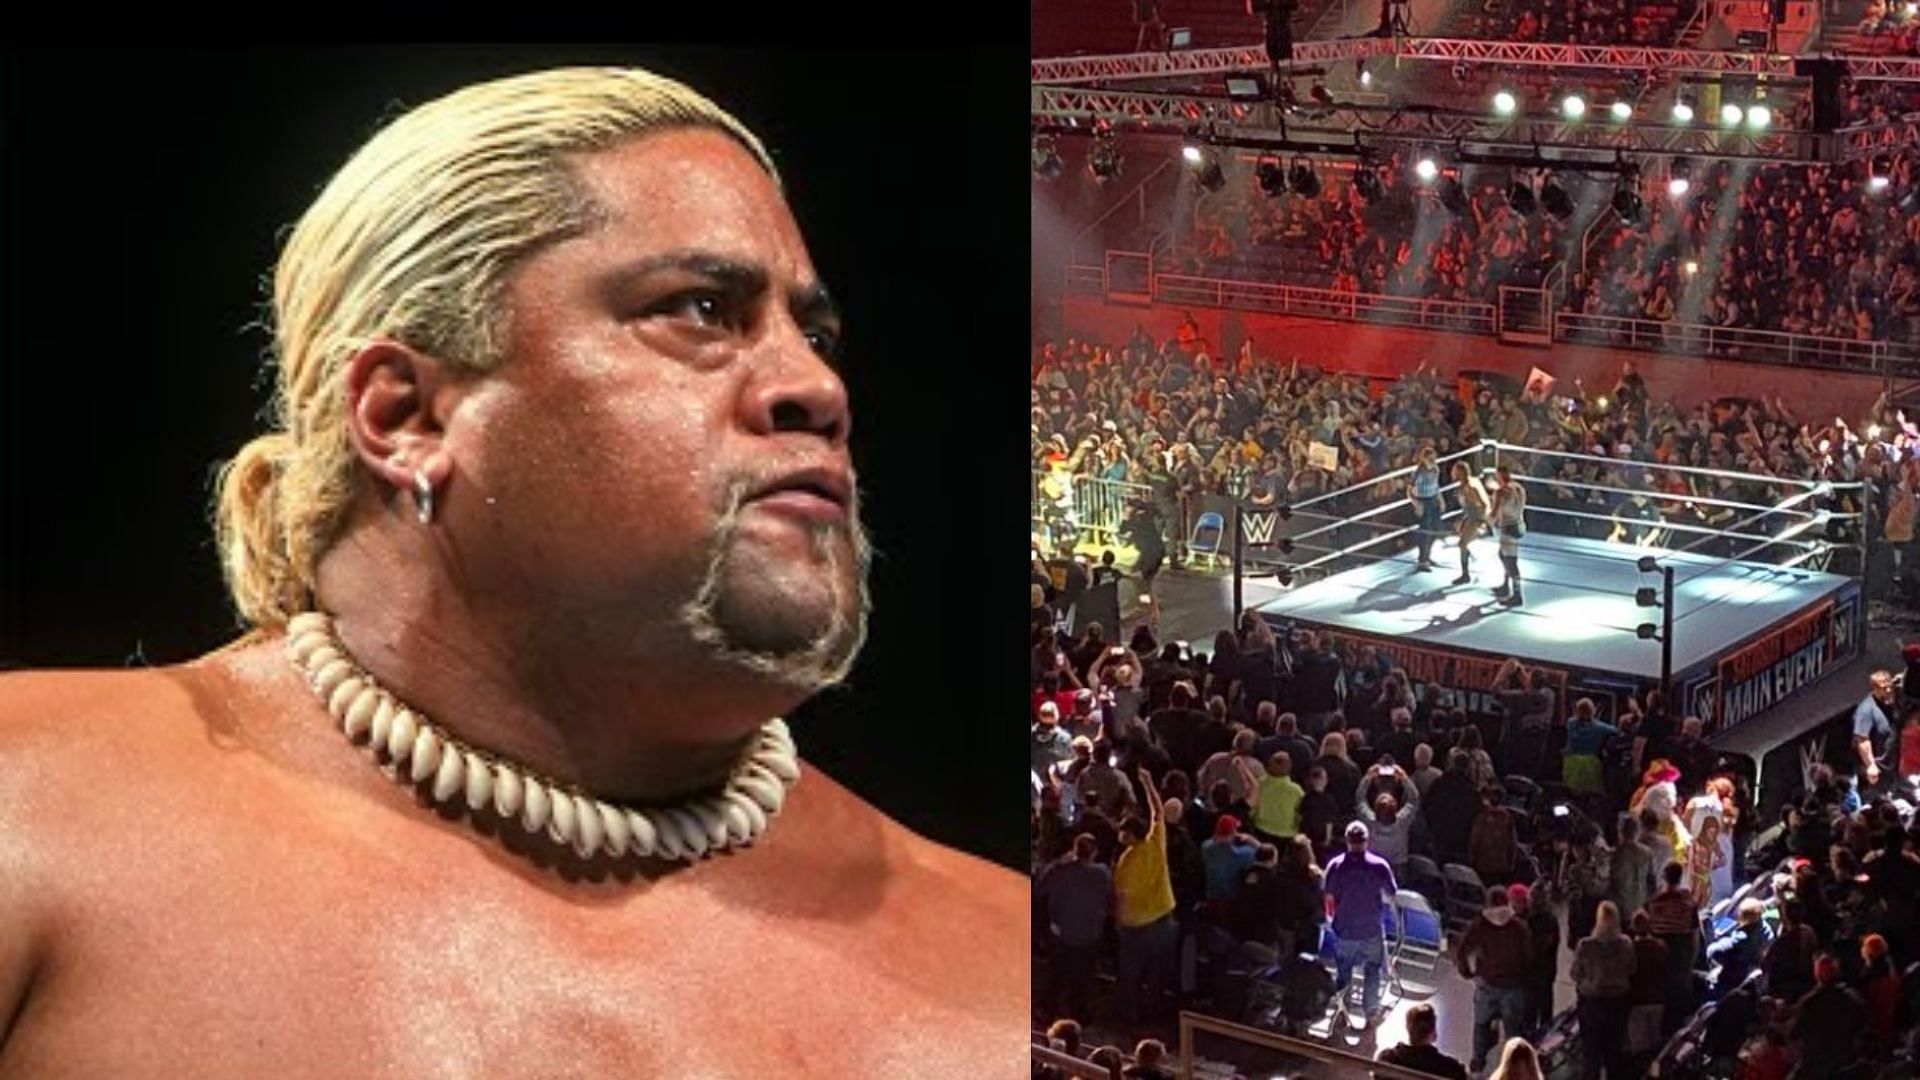 Rikishi still has considerable influence in the wrestling industry